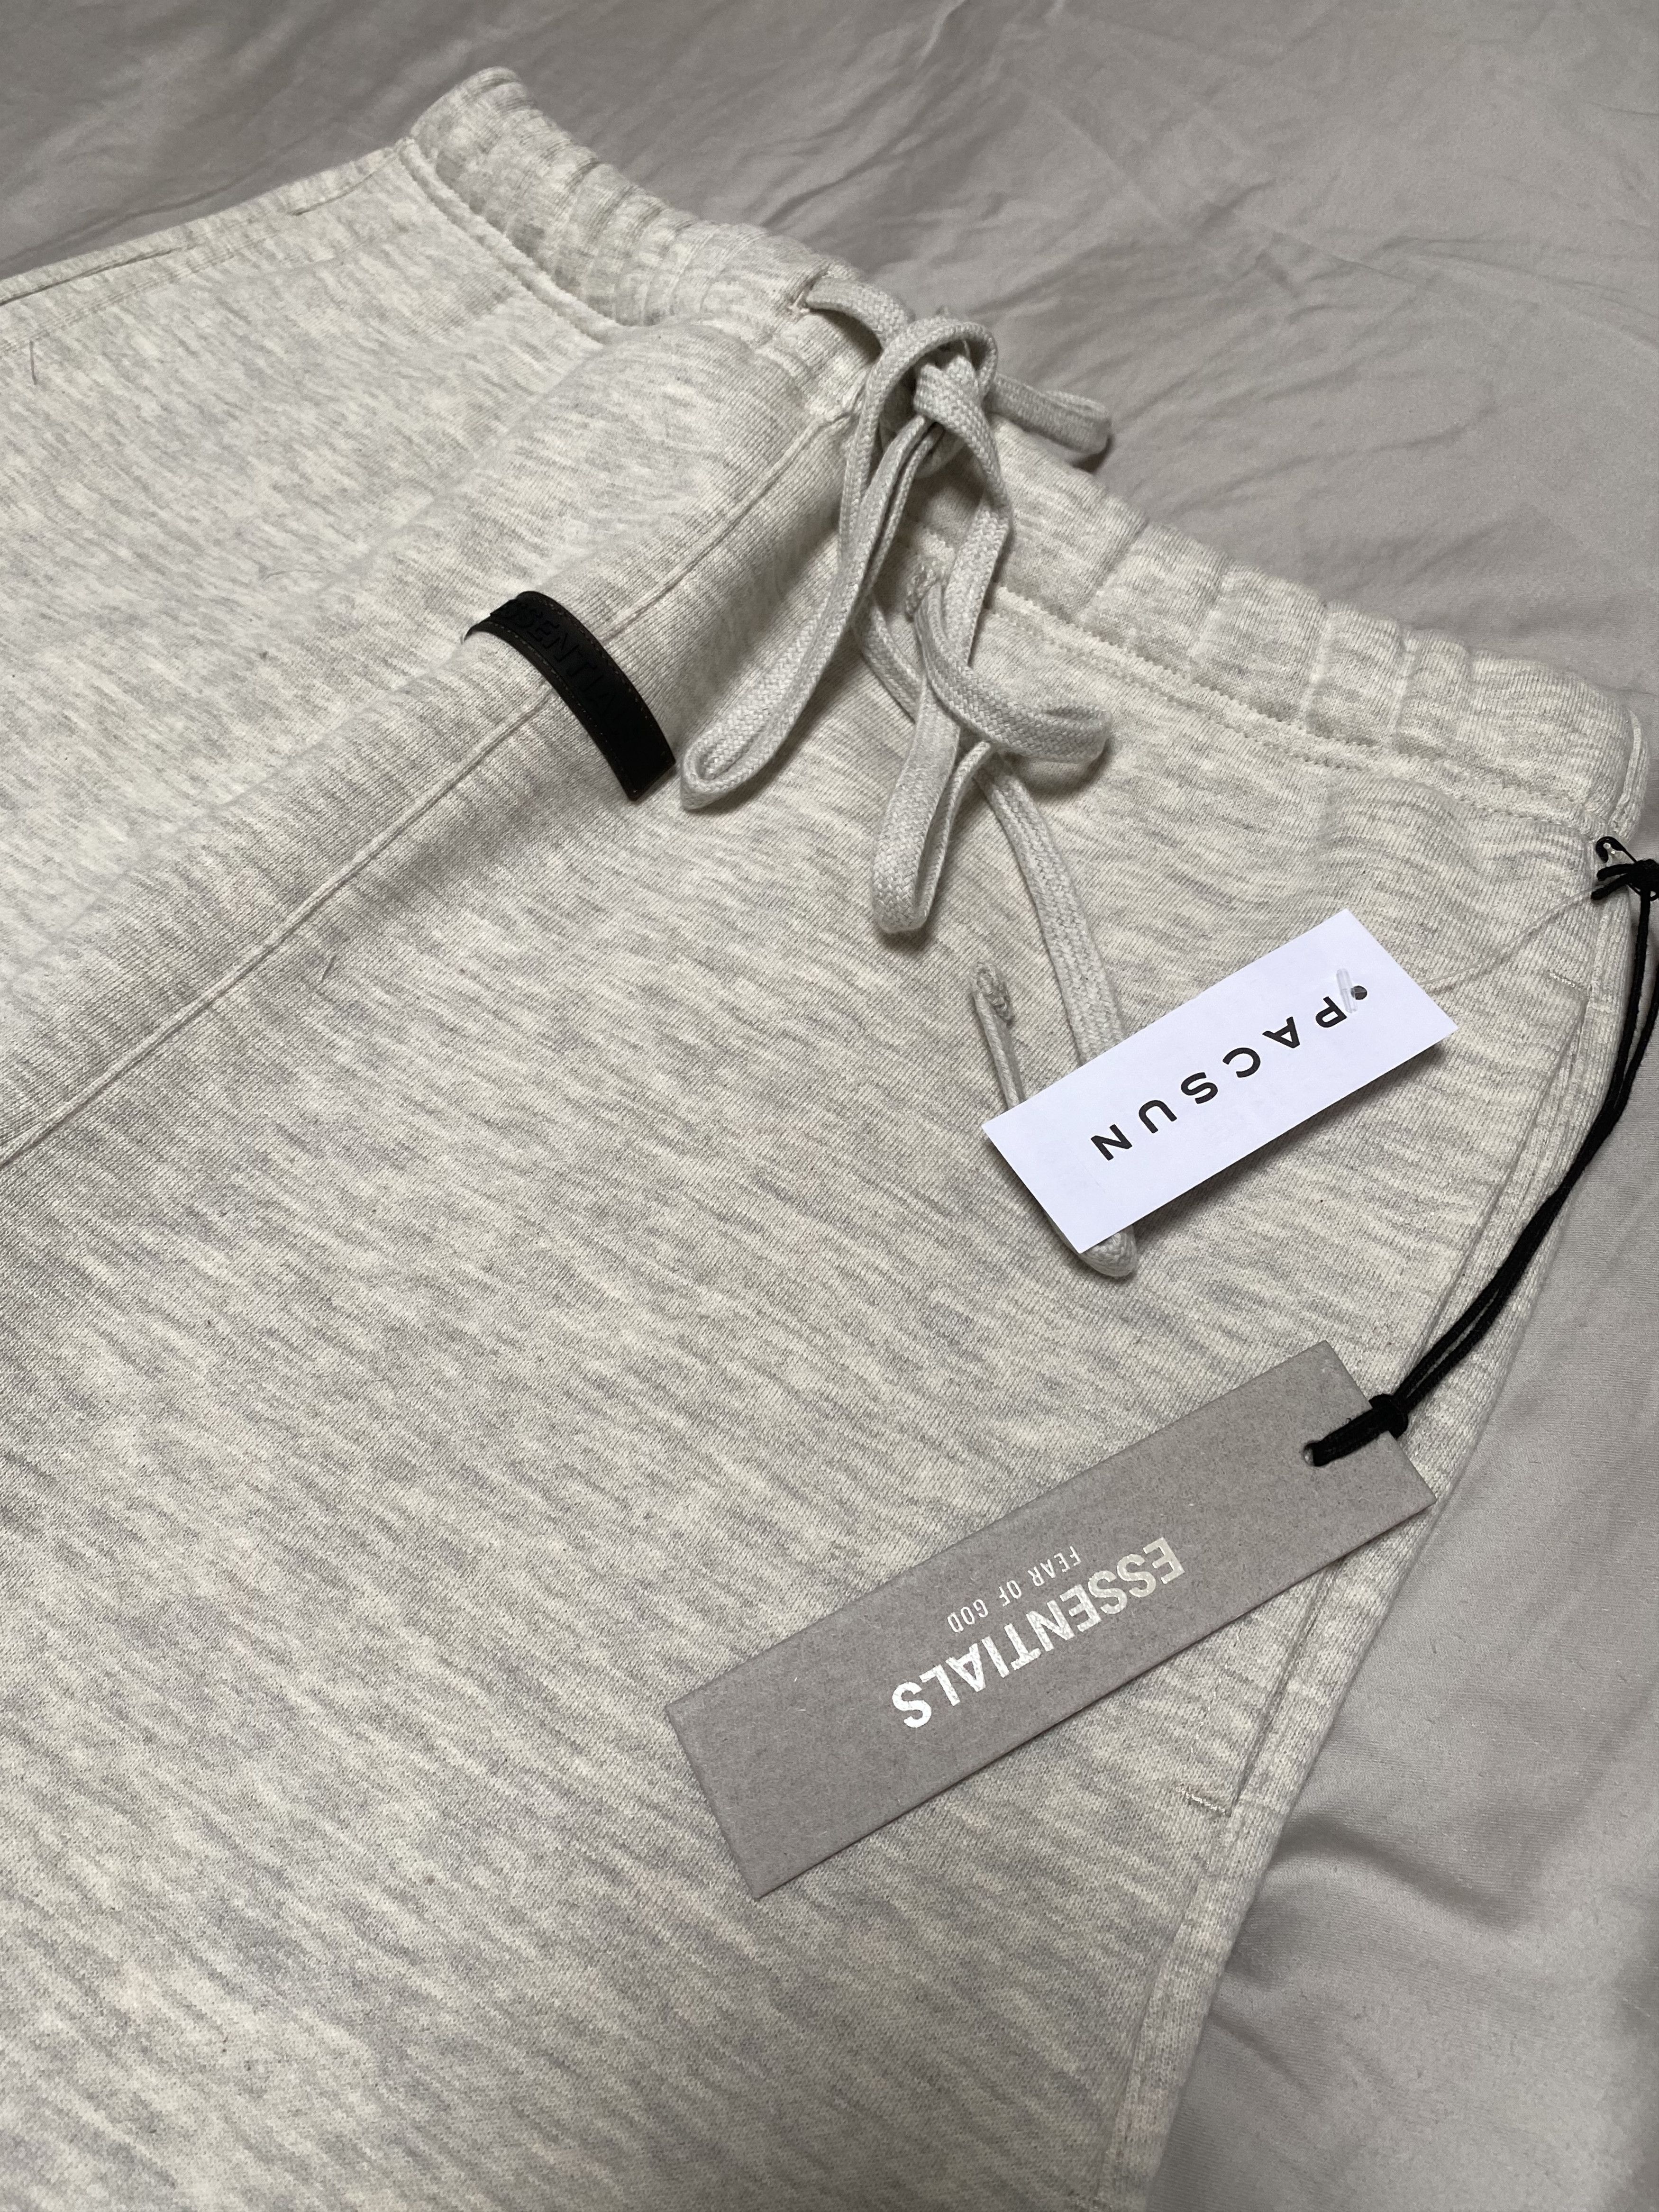 Fear of God FEAR OF GOD ESSENTIAL SWEATPANTS LIGHT HEATHER OATMEAL Size US 32 / EU 48 - 2 Preview